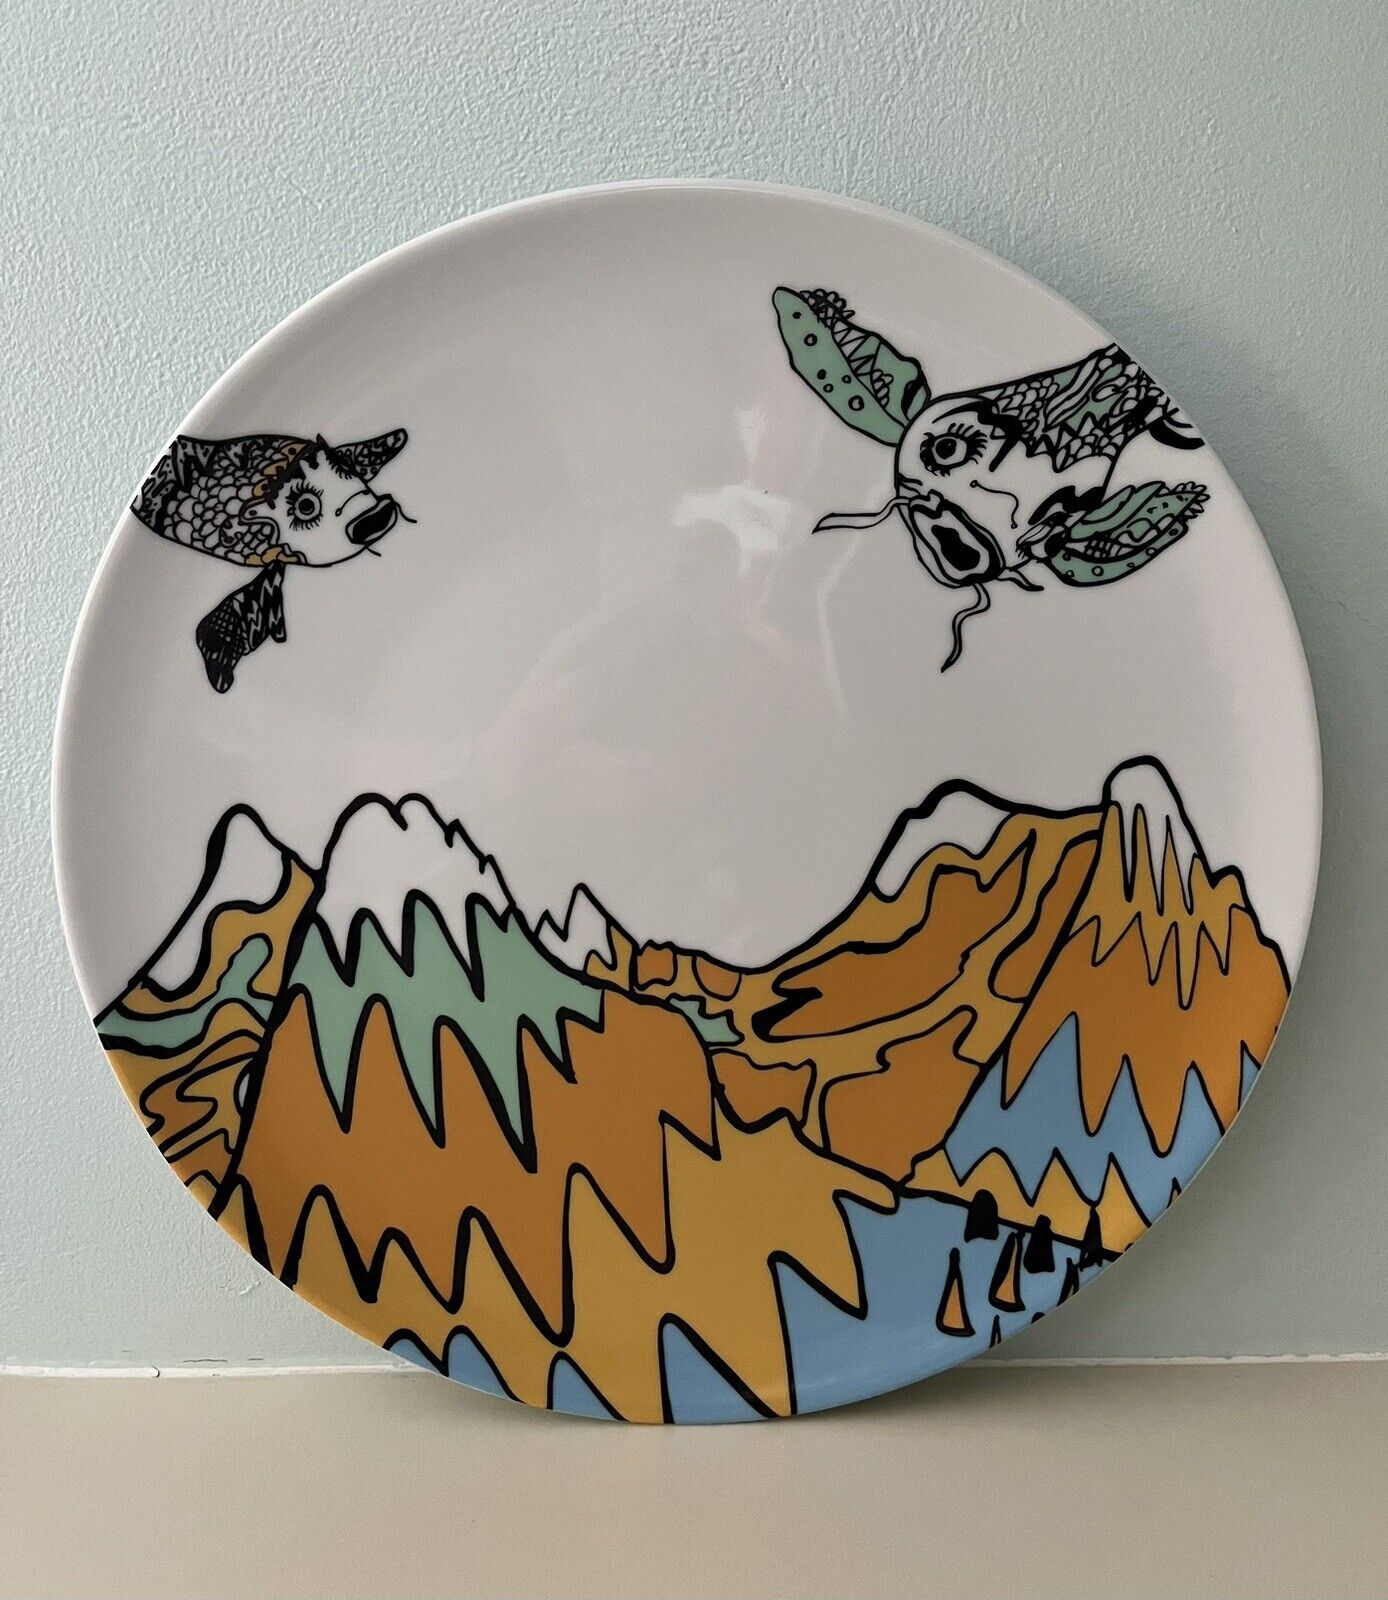 IKEA Flying Fish over Mountains 11” Dinner Plate 23102 Sweden Poland Made RARE